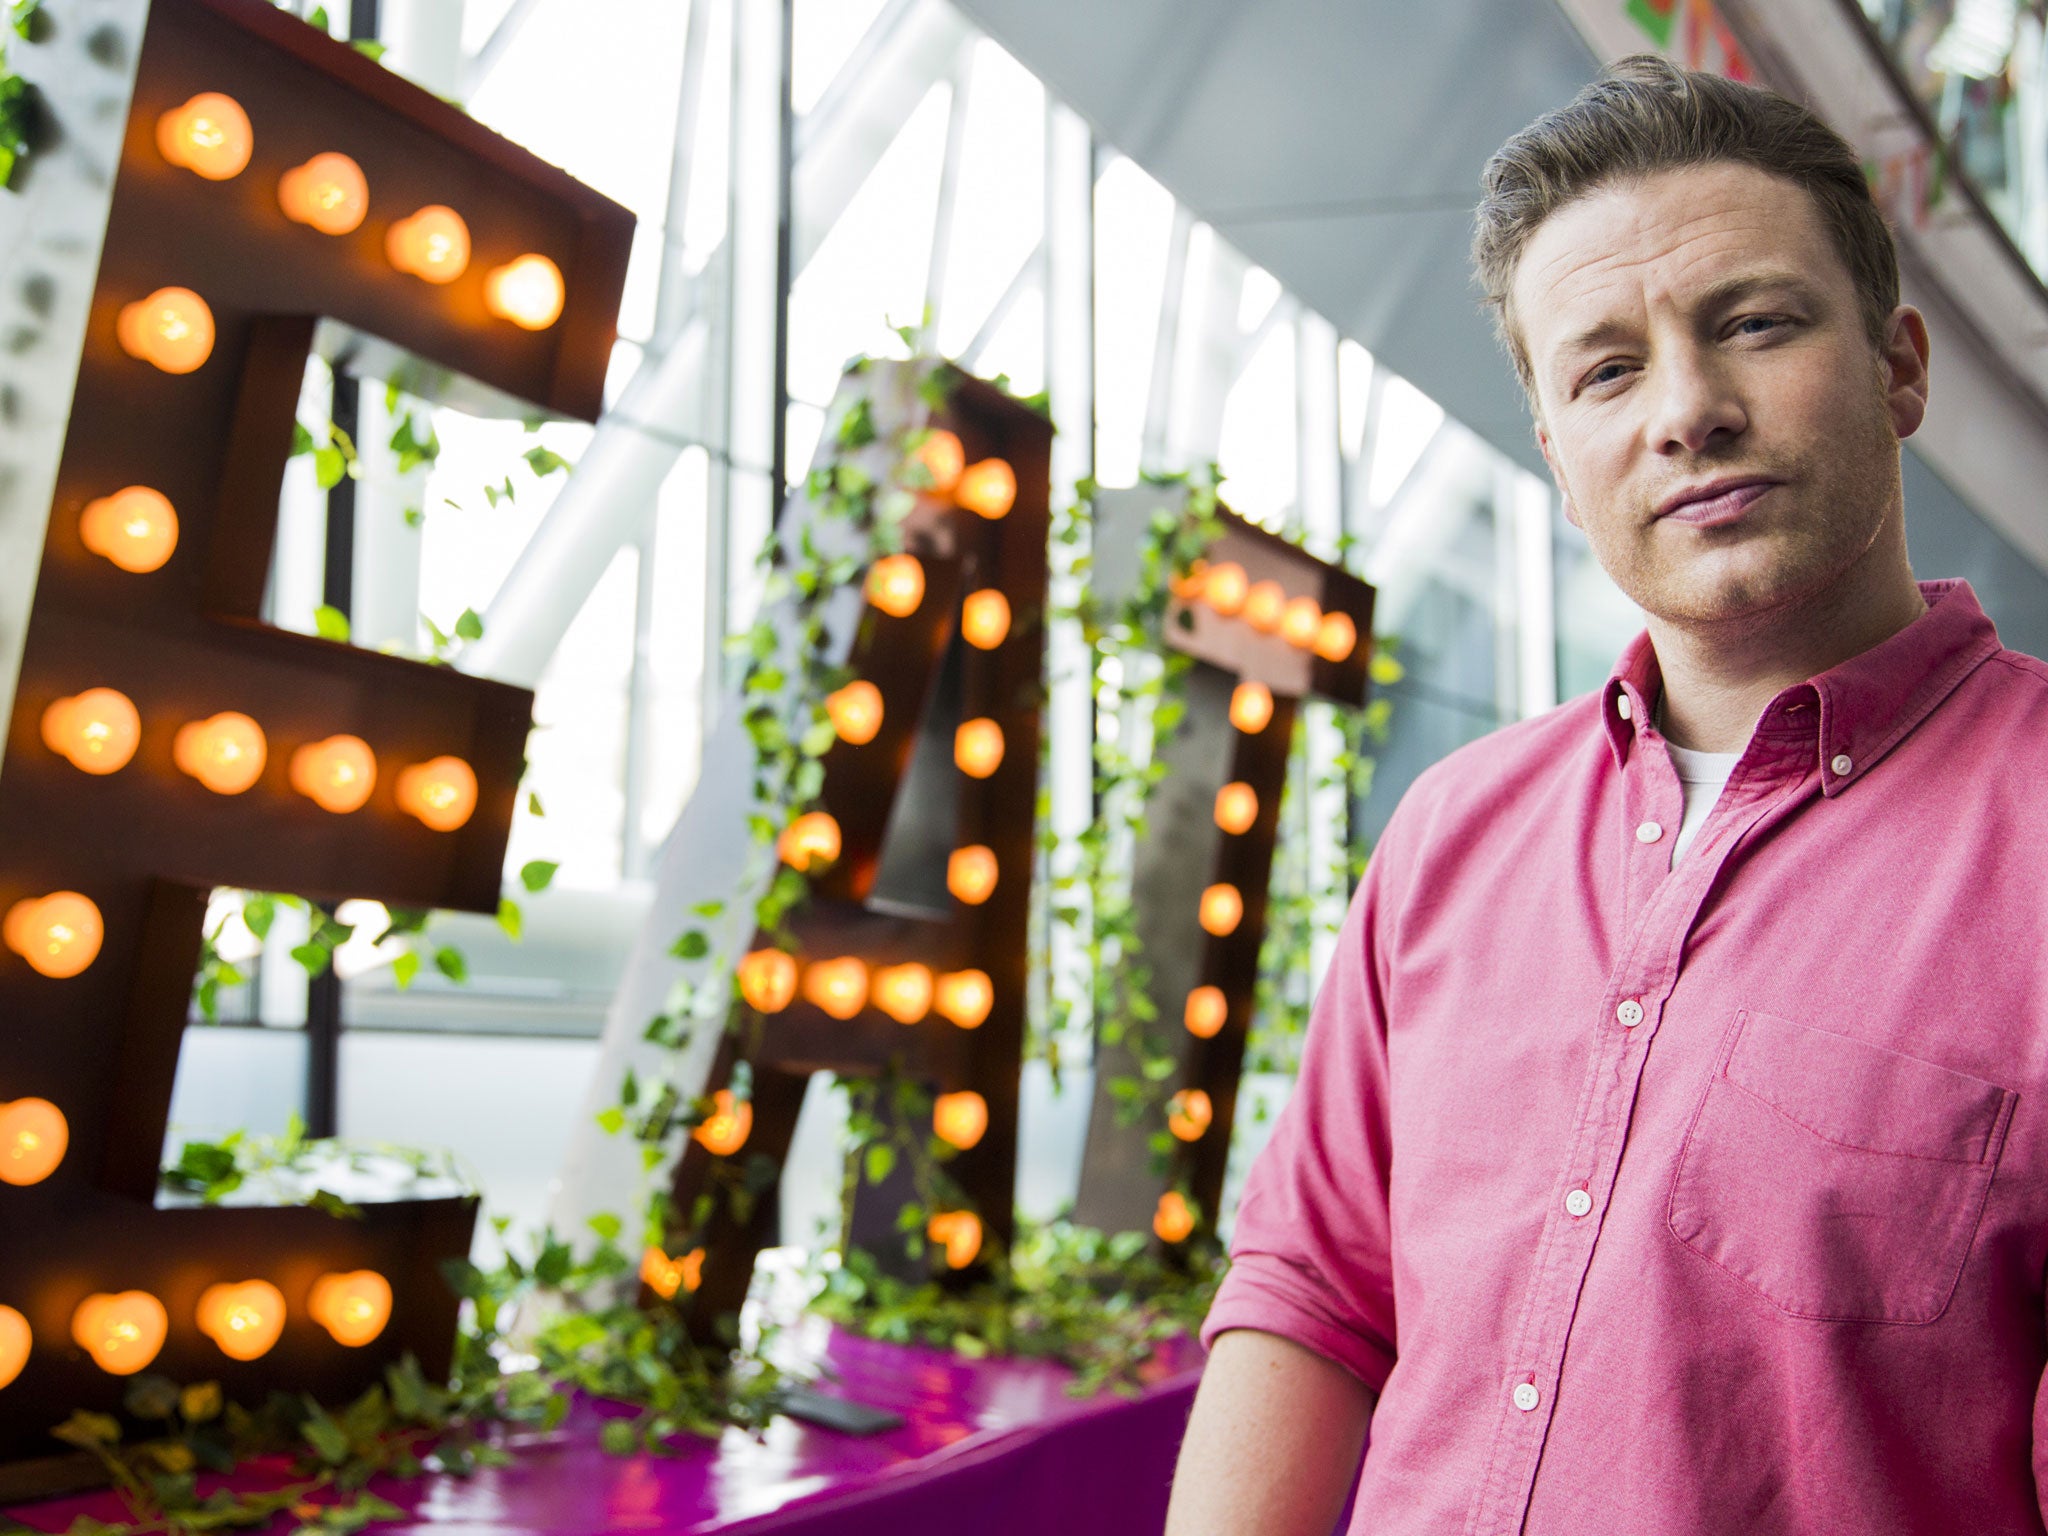 Jamie Oliver has revealed his 14 'hero' ingredients including garlic and eggs